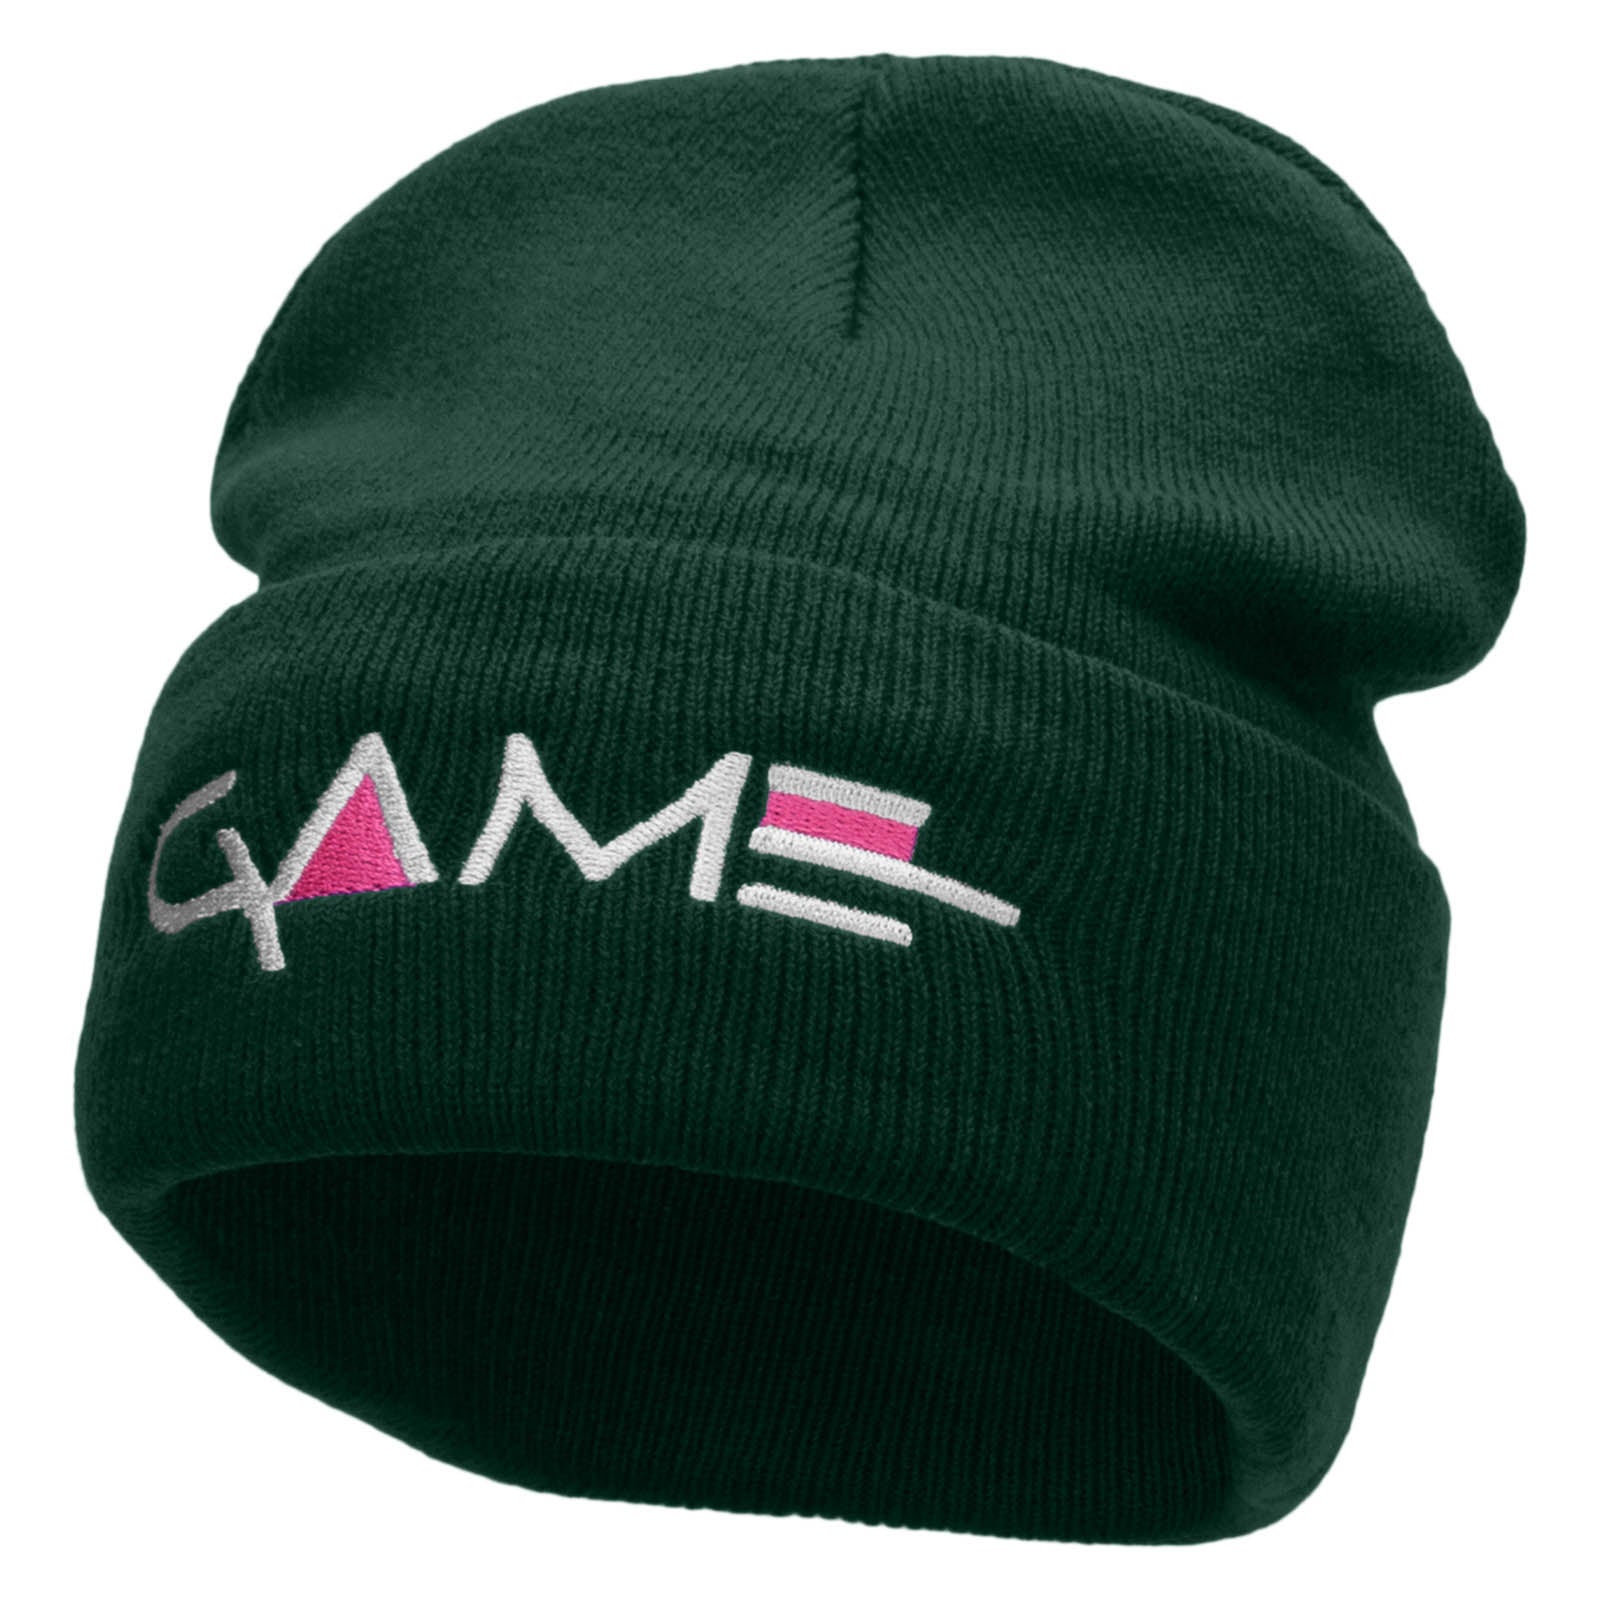 Game Embroidered 12 Inch Long Knitted Beanie - Dk Green OSFM